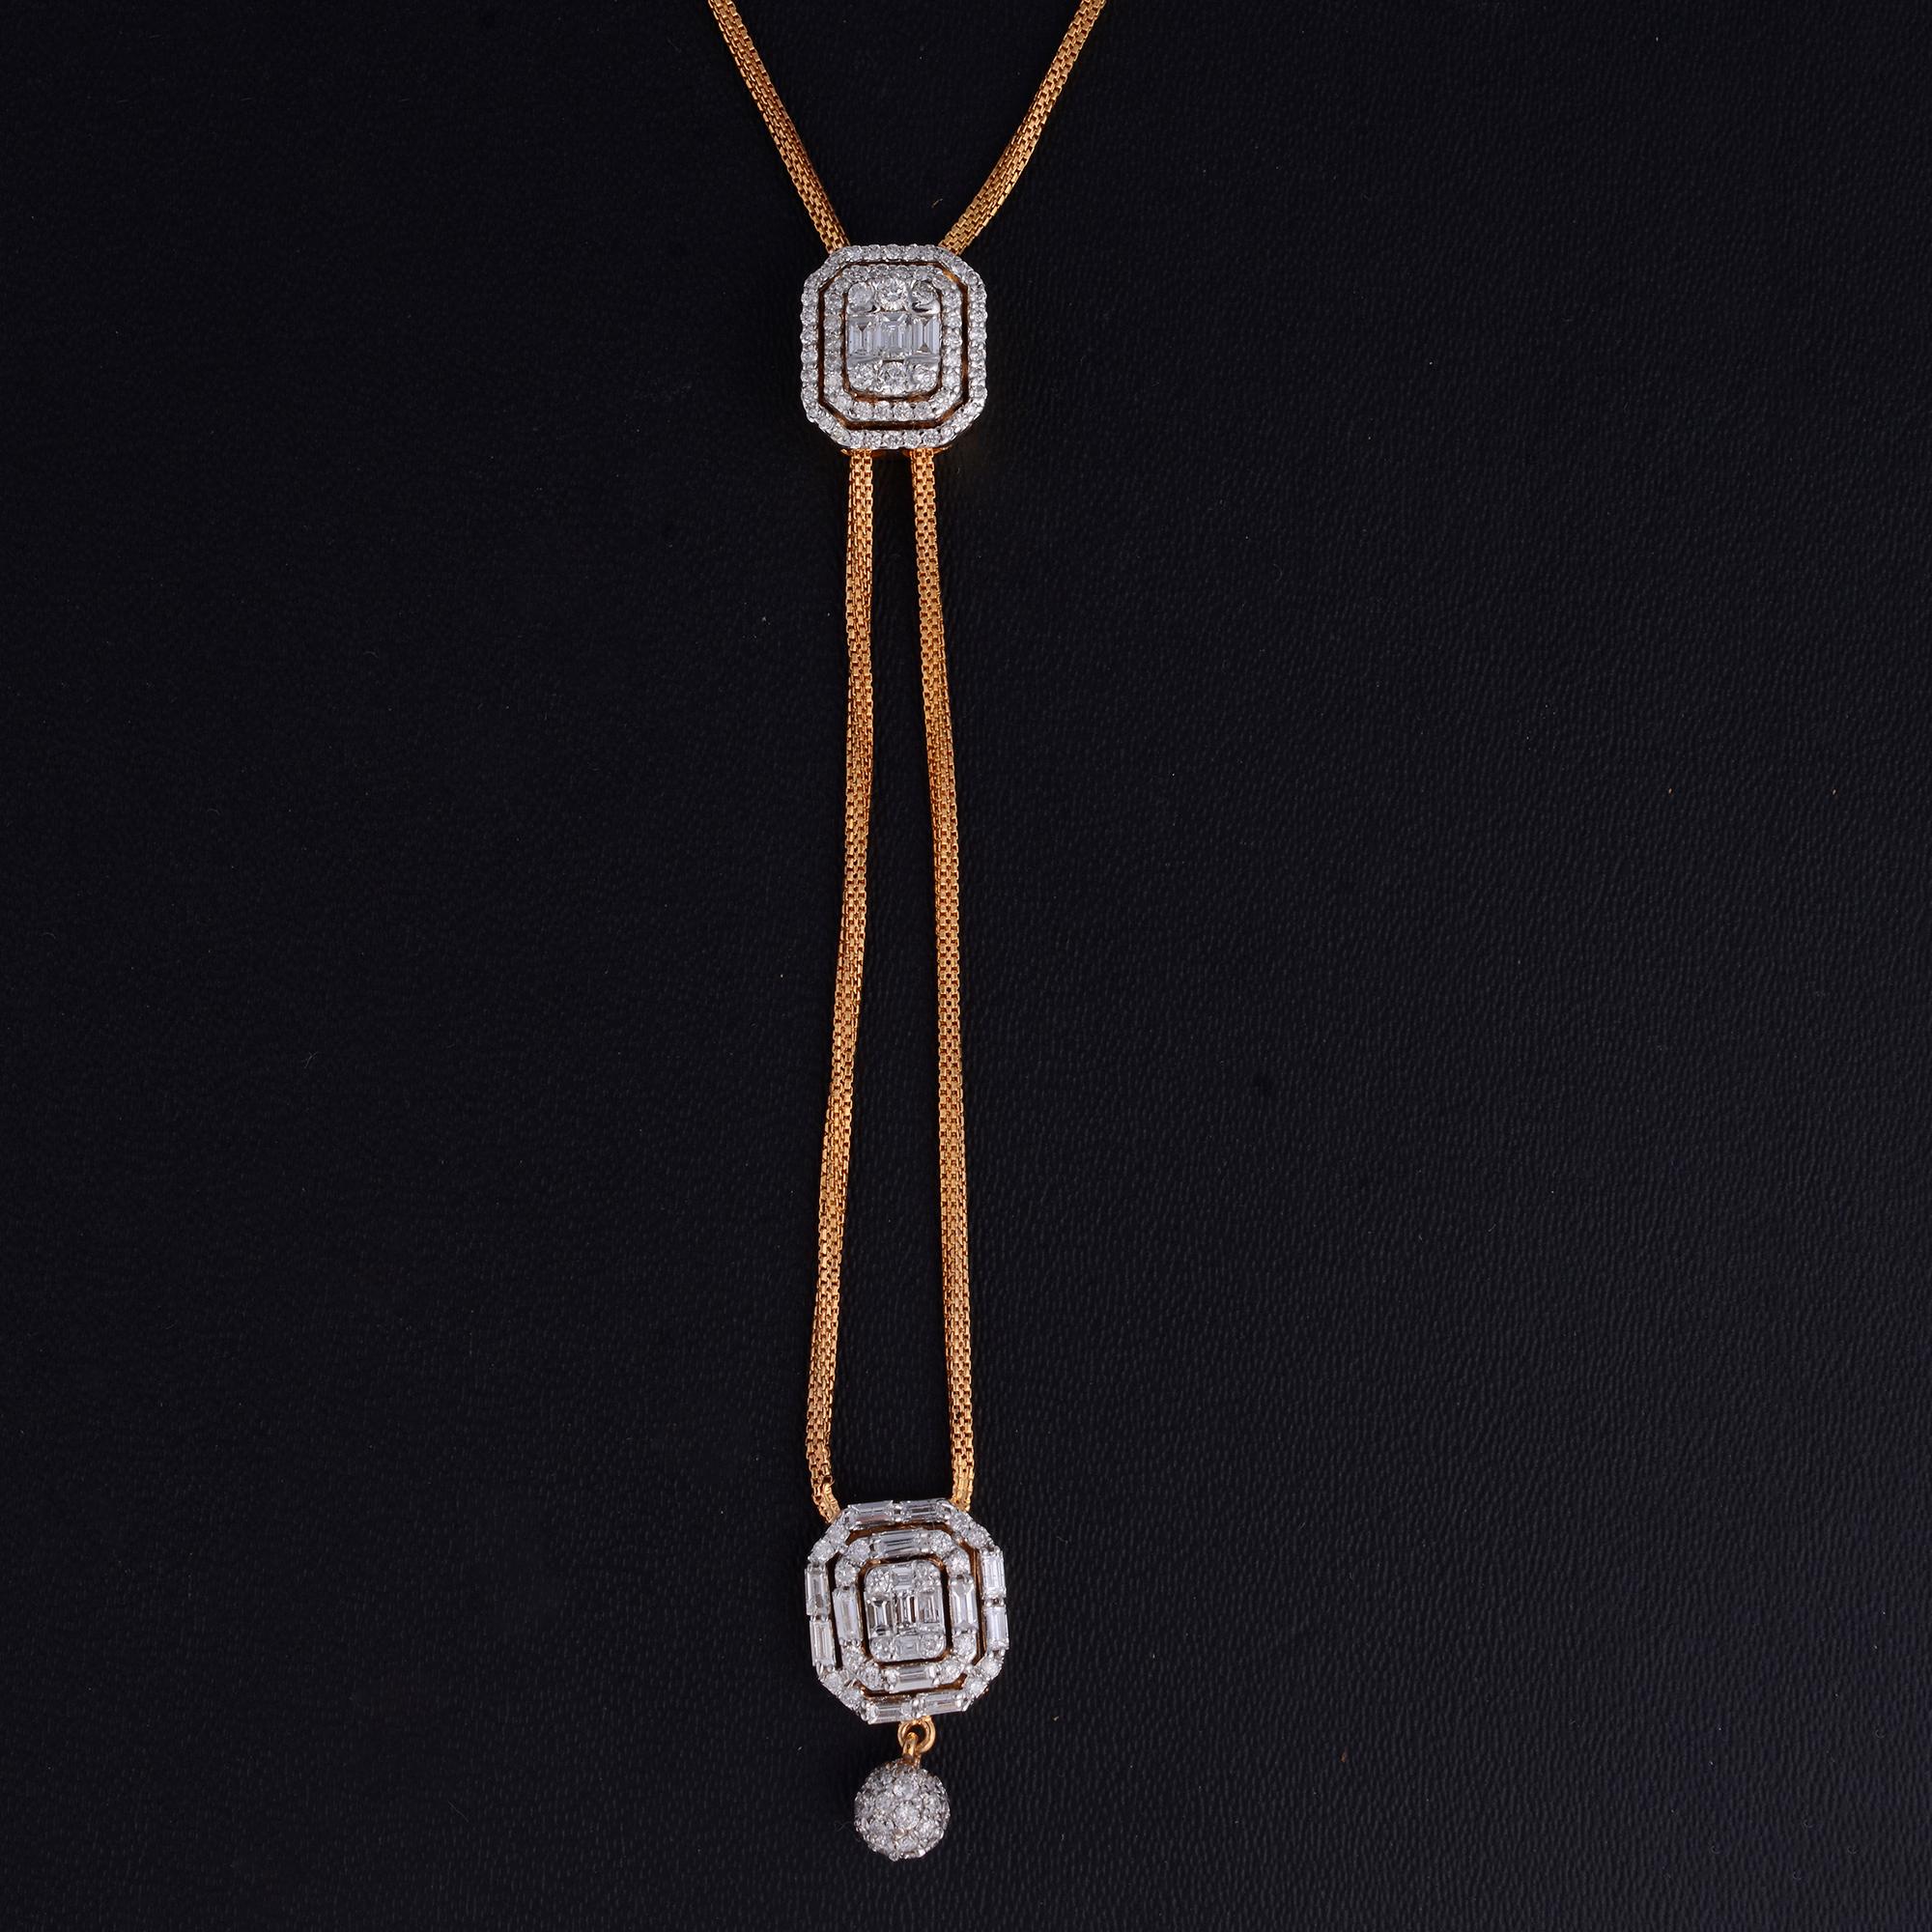 Crafted in 18 Karat rose gold, the setting of the necklace exudes a romantic and feminine charm. The rose gold complements the diamonds beautifully, creating a harmonious blend of colors that enhances the overall appeal of the necklace.

Item Code